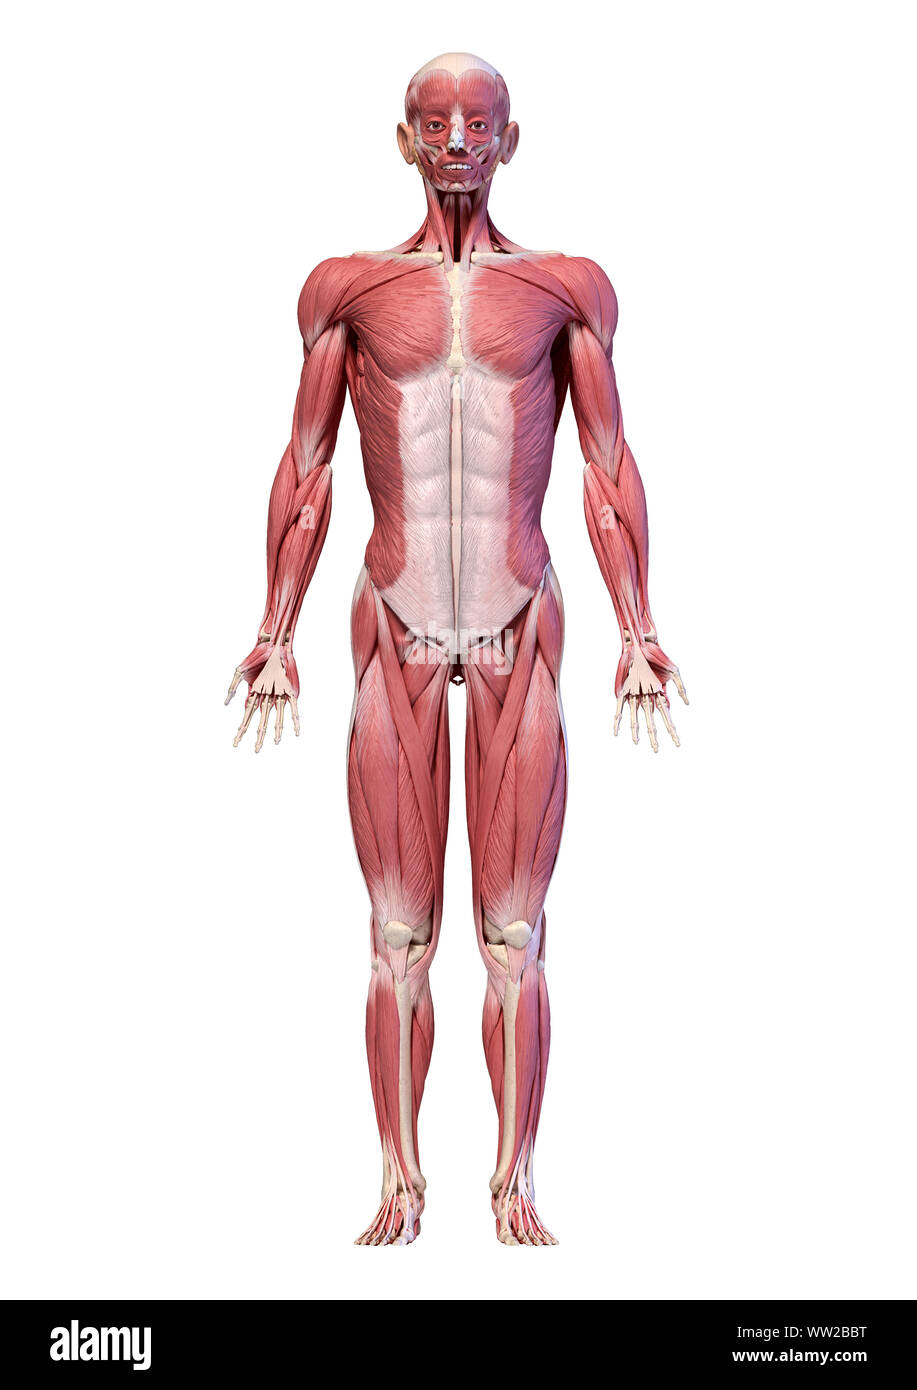 Human anatomy 3d illustration, male muscular system full body, frontal  view. On white background Stock Photo - Alamy